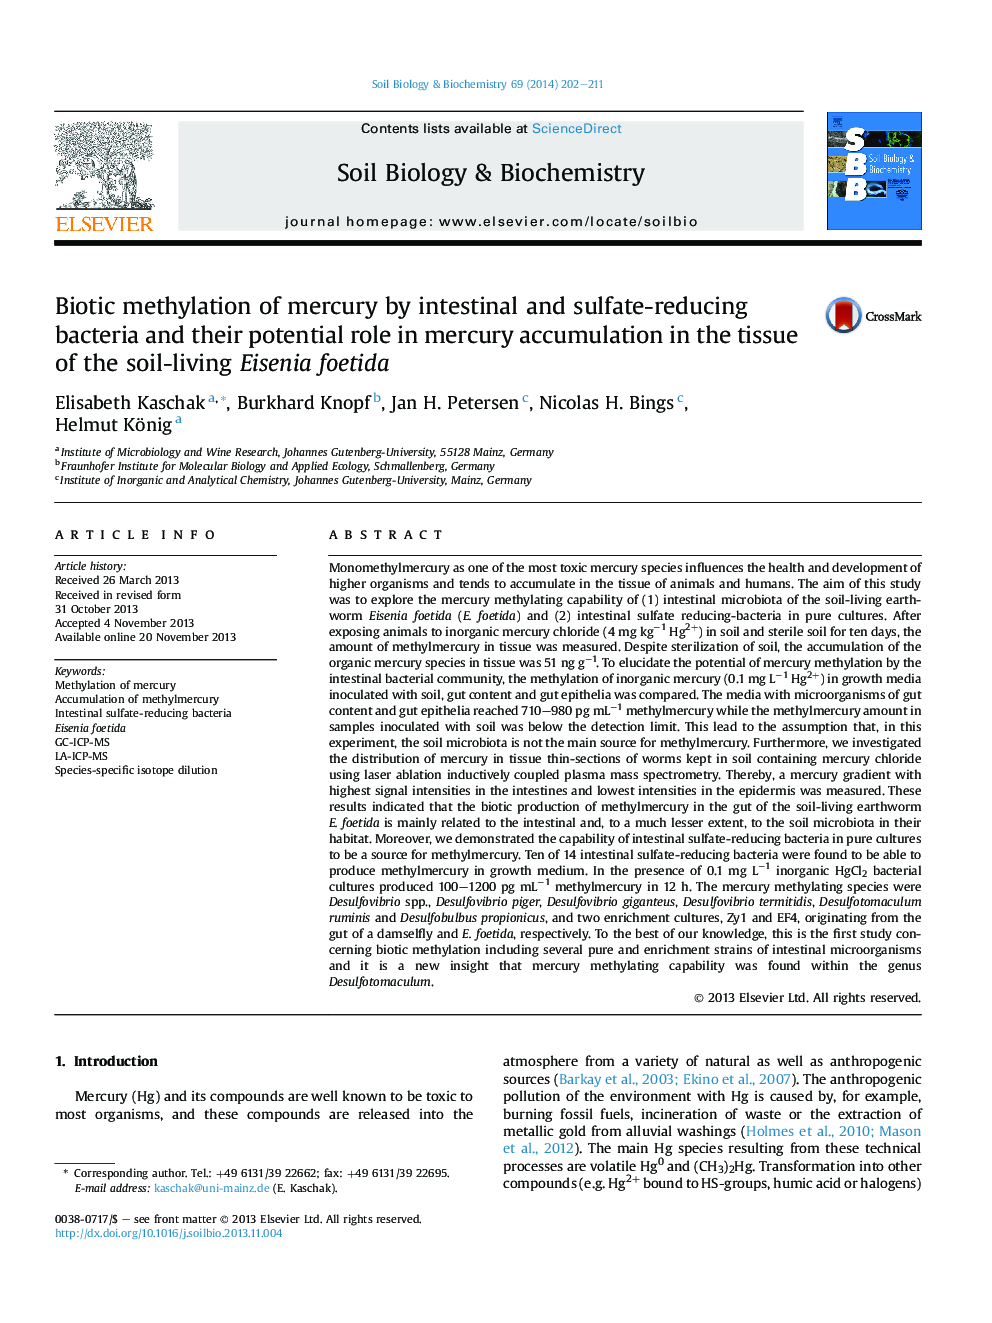 Biotic methylation of mercury by intestinal and sulfate-reducing bacteria and their potential role in mercury accumulation in the tissue of the soil-living Eisenia foetida